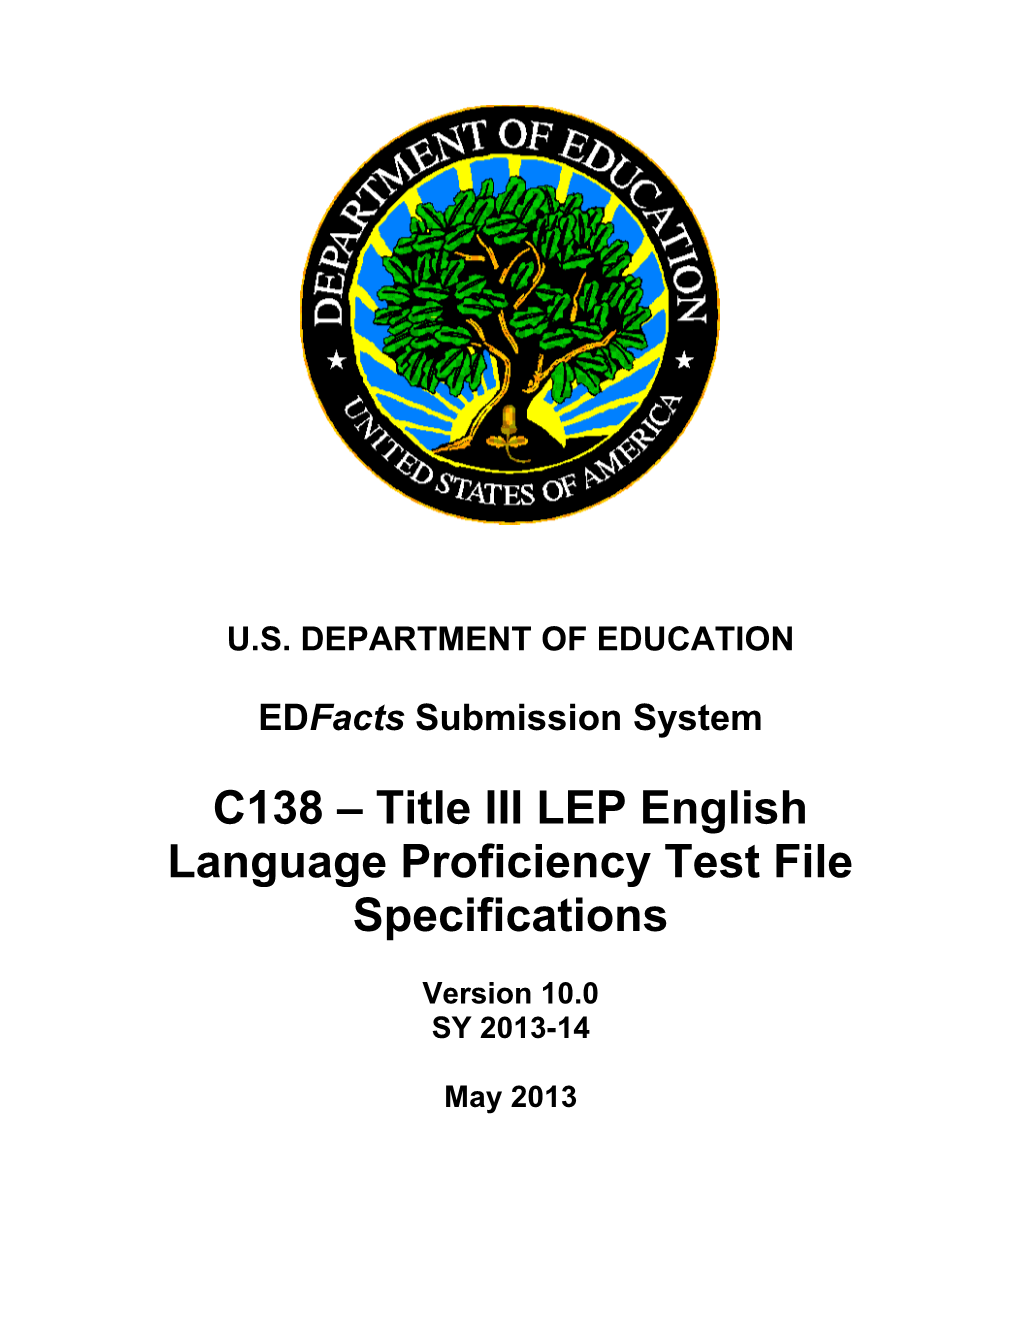 Title III LEP English Language Proficiency Test File Specifications